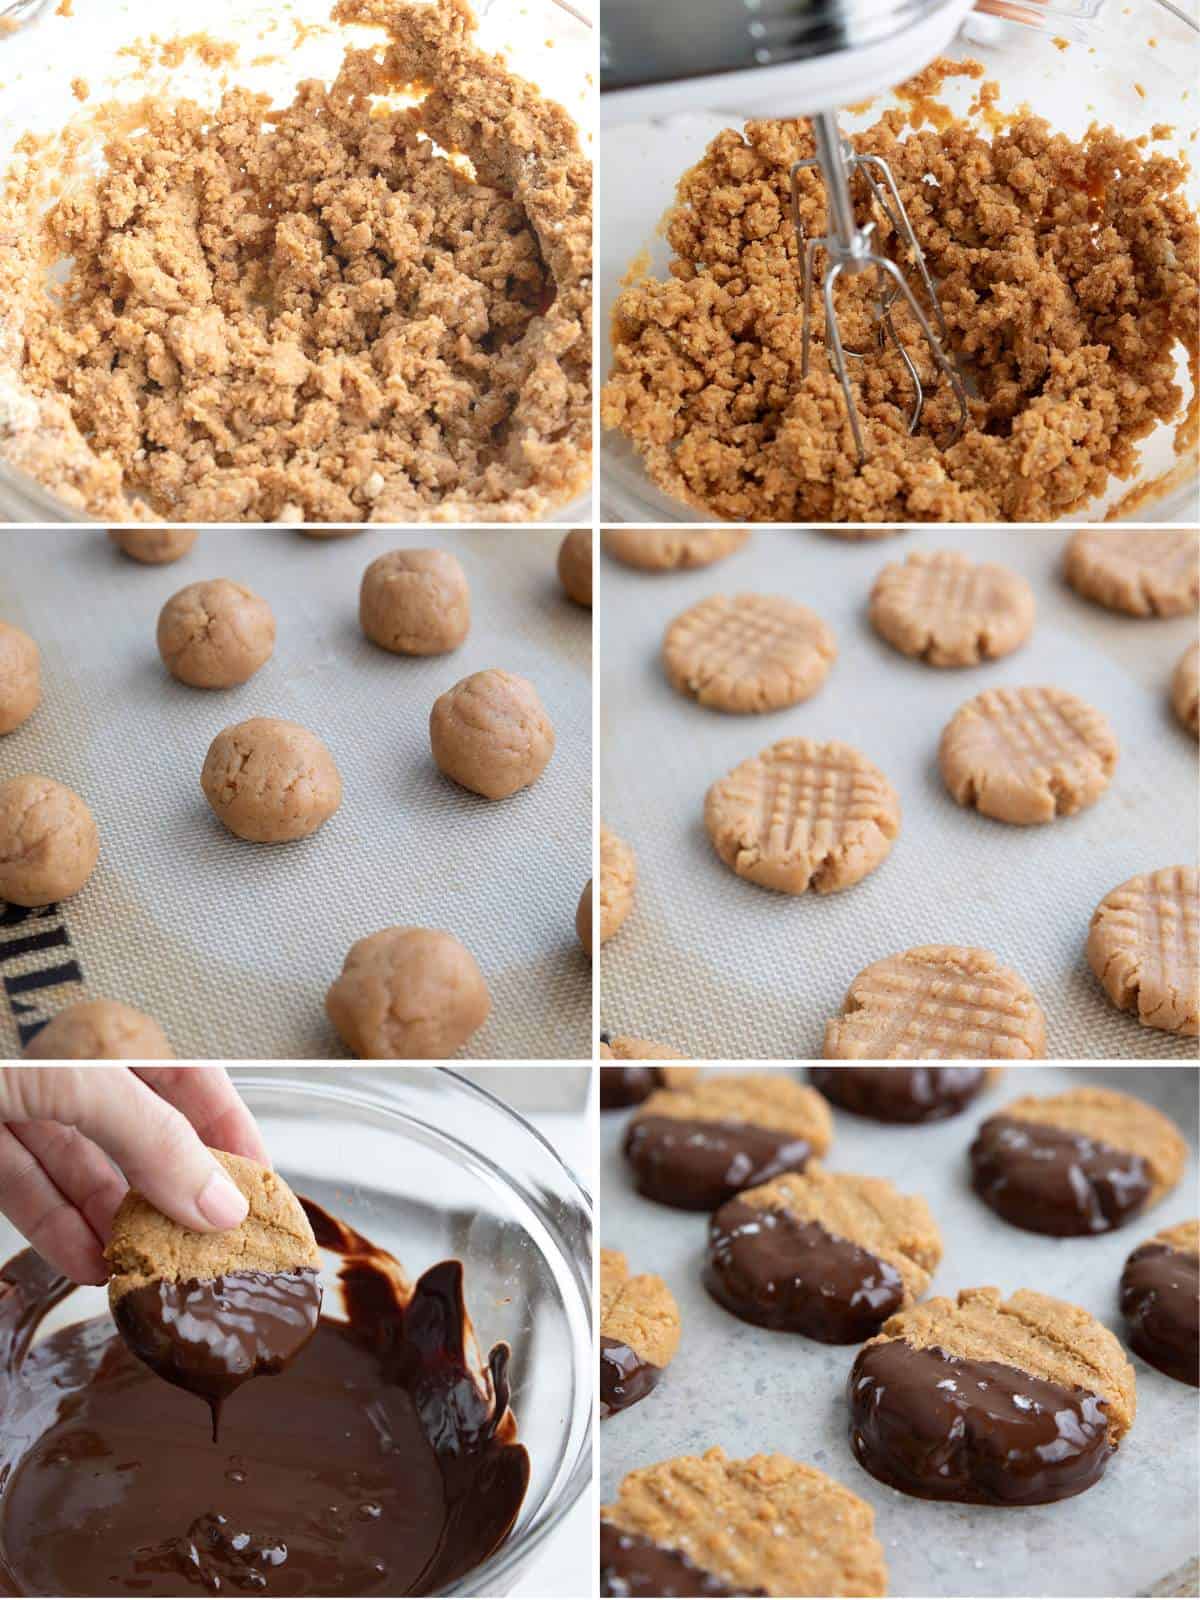 A collage of 6 images showing how to make Keto Peanut Butter Cookies